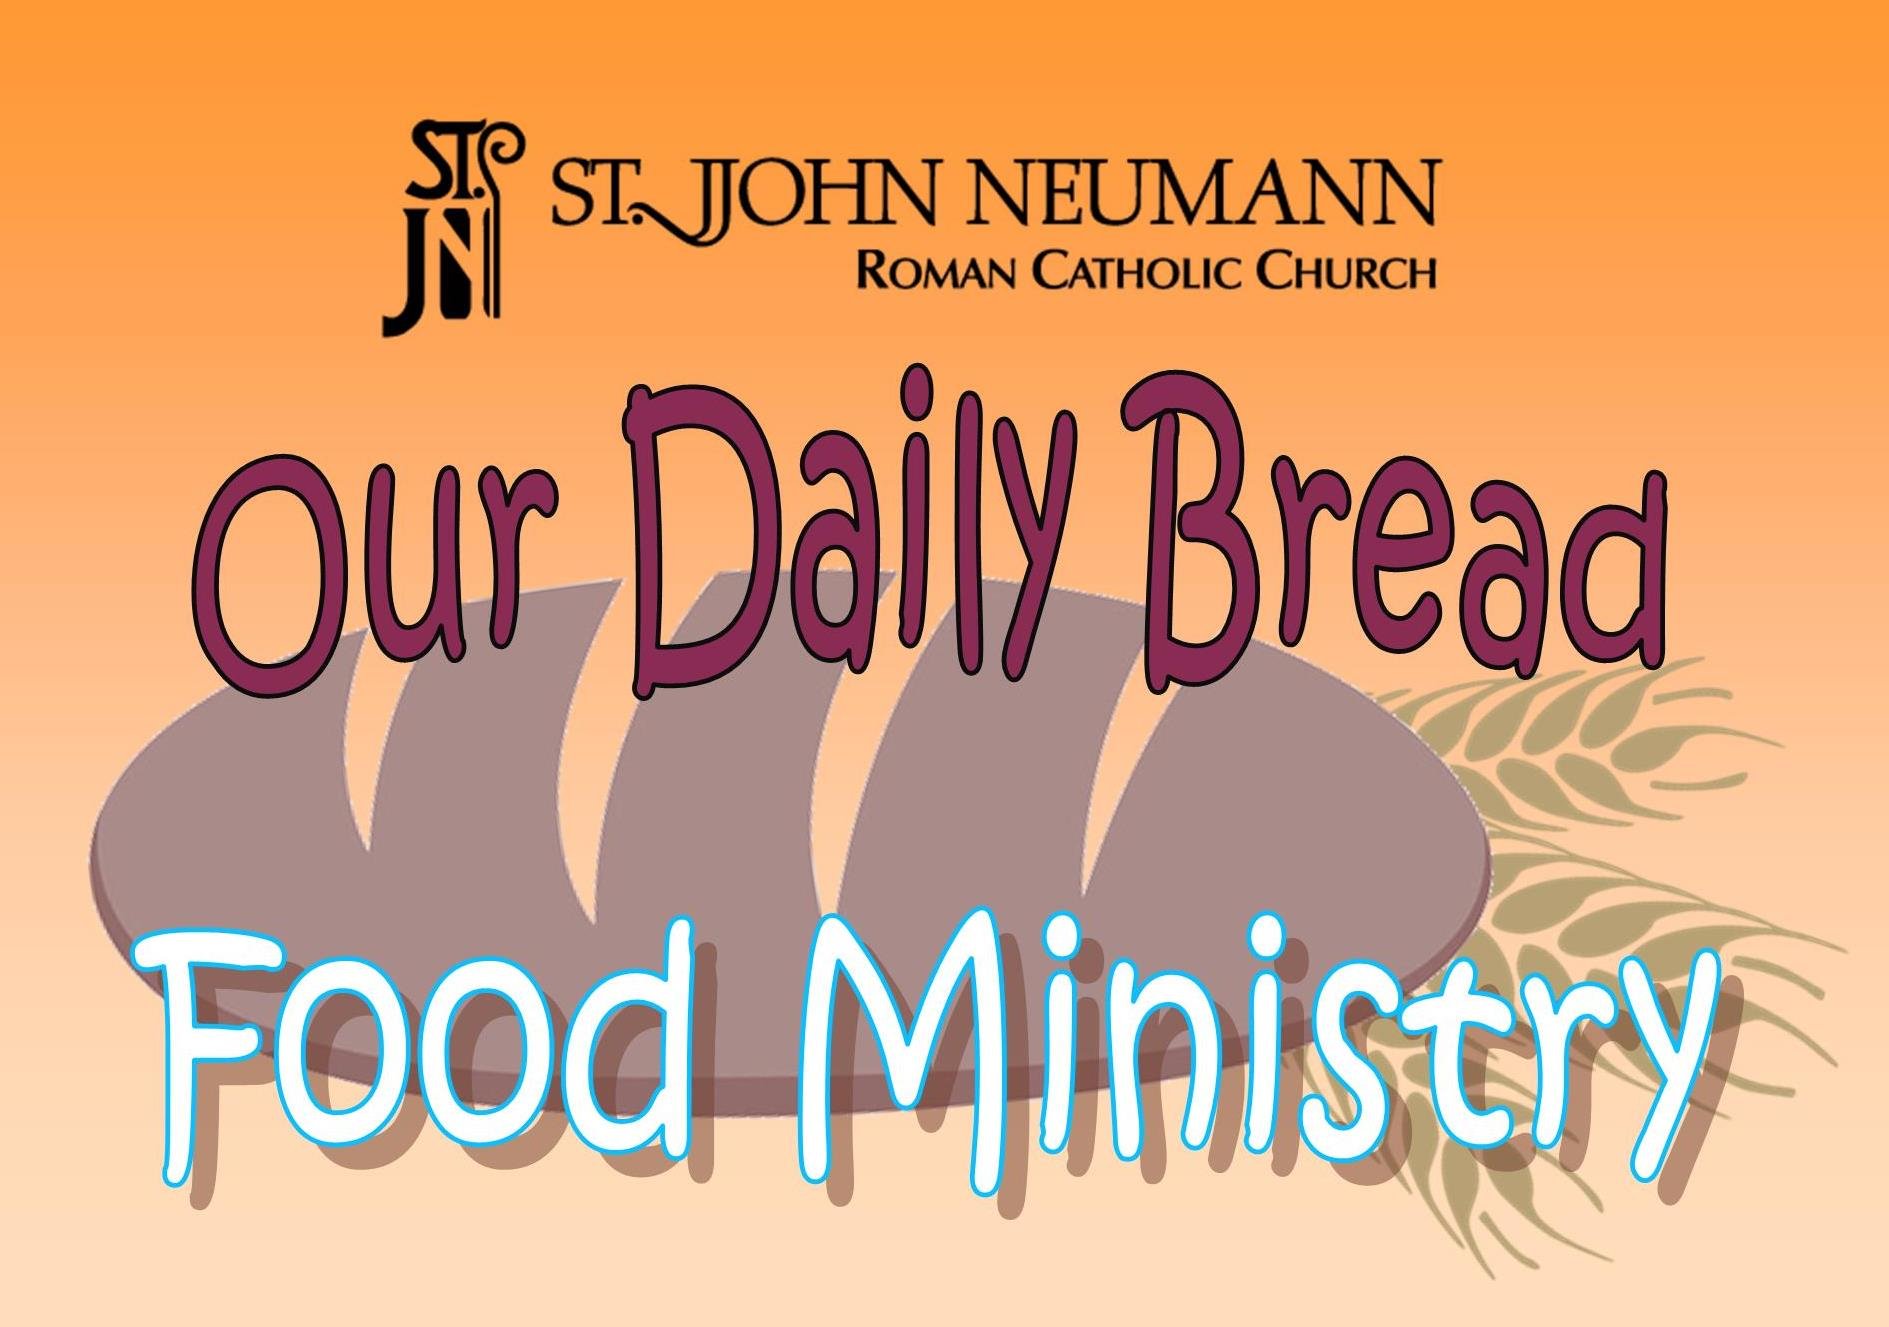 Copy of Daily Bread logo updated (003).jpg